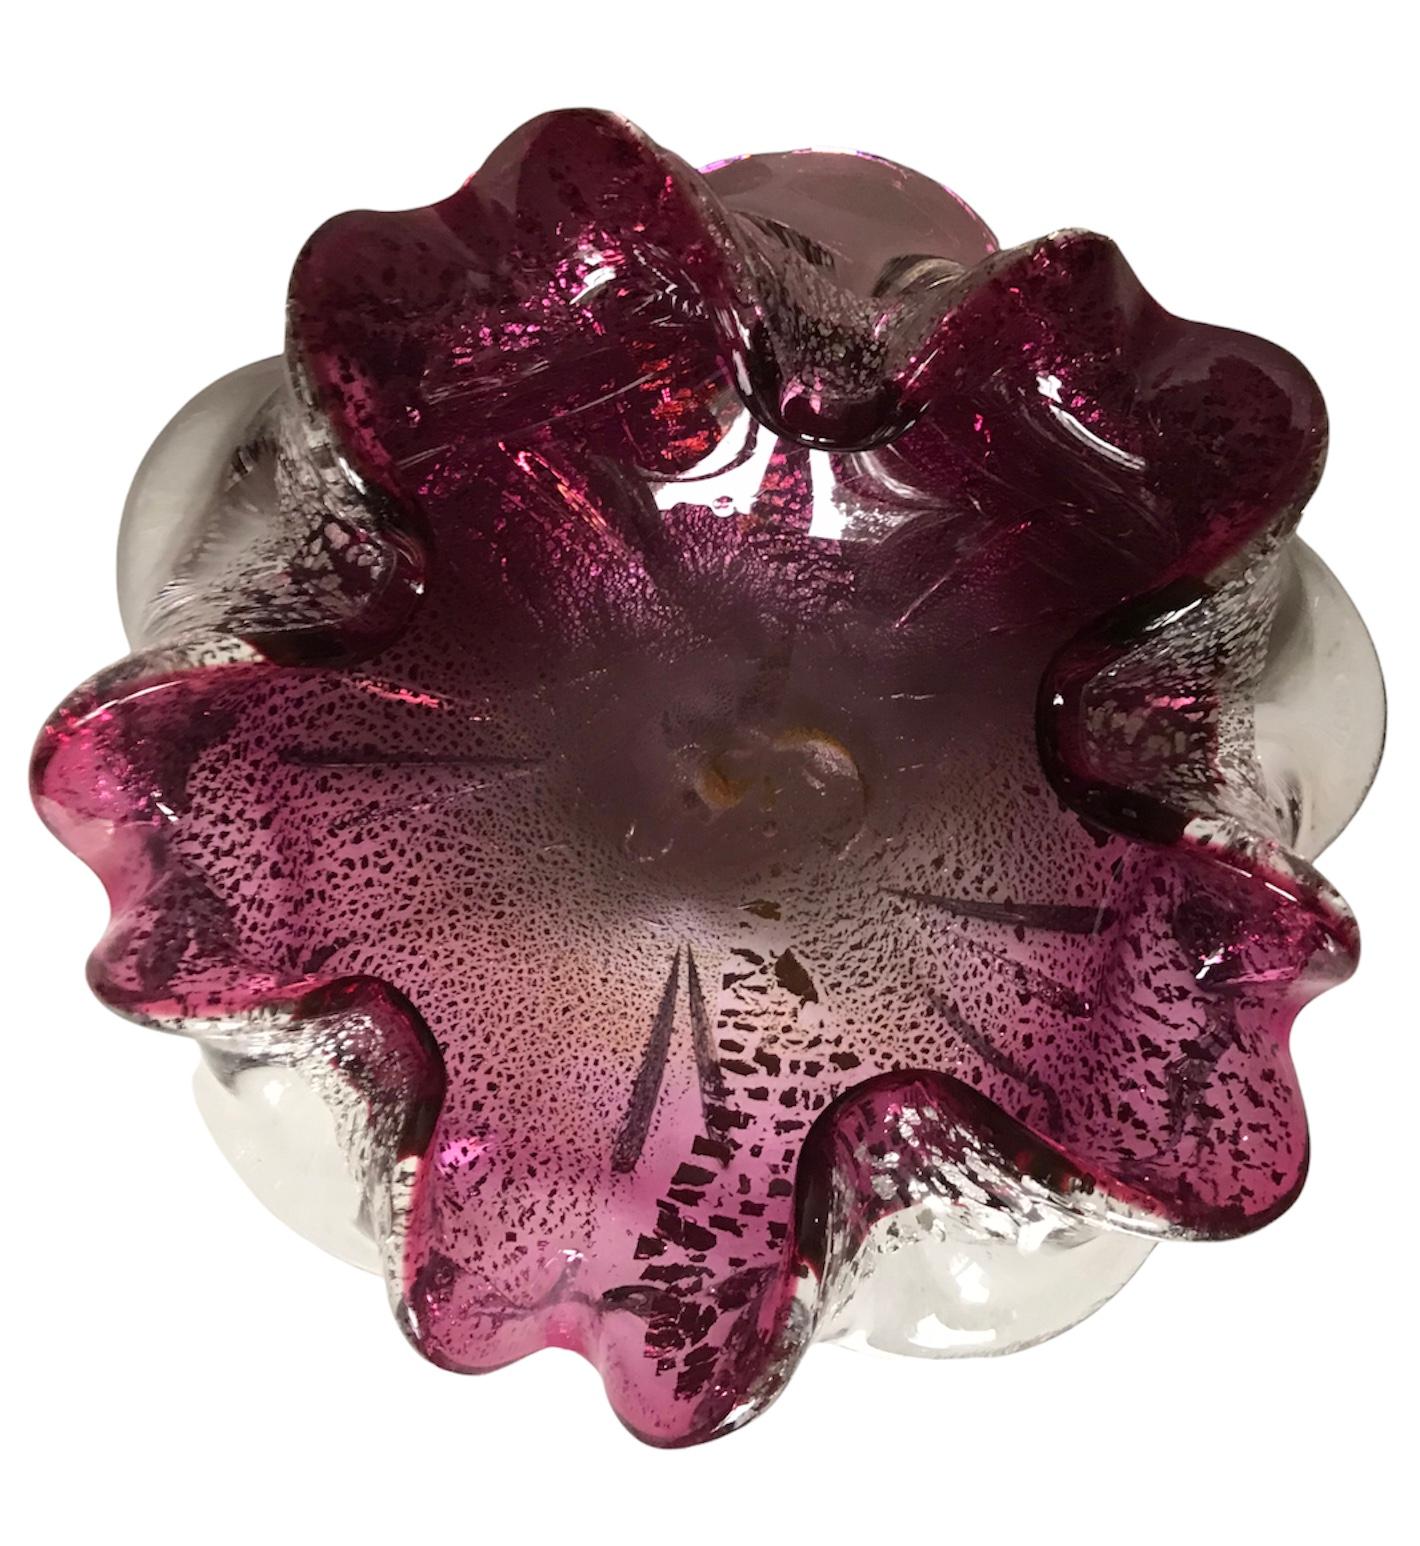 Spectacular representation of an art glass bowl from world renown glass artist/manufacturer Murano (Italy). The bowl has a free flowing ruffle formation with silver and gold specs highlighted from within. An MCM piece of art.